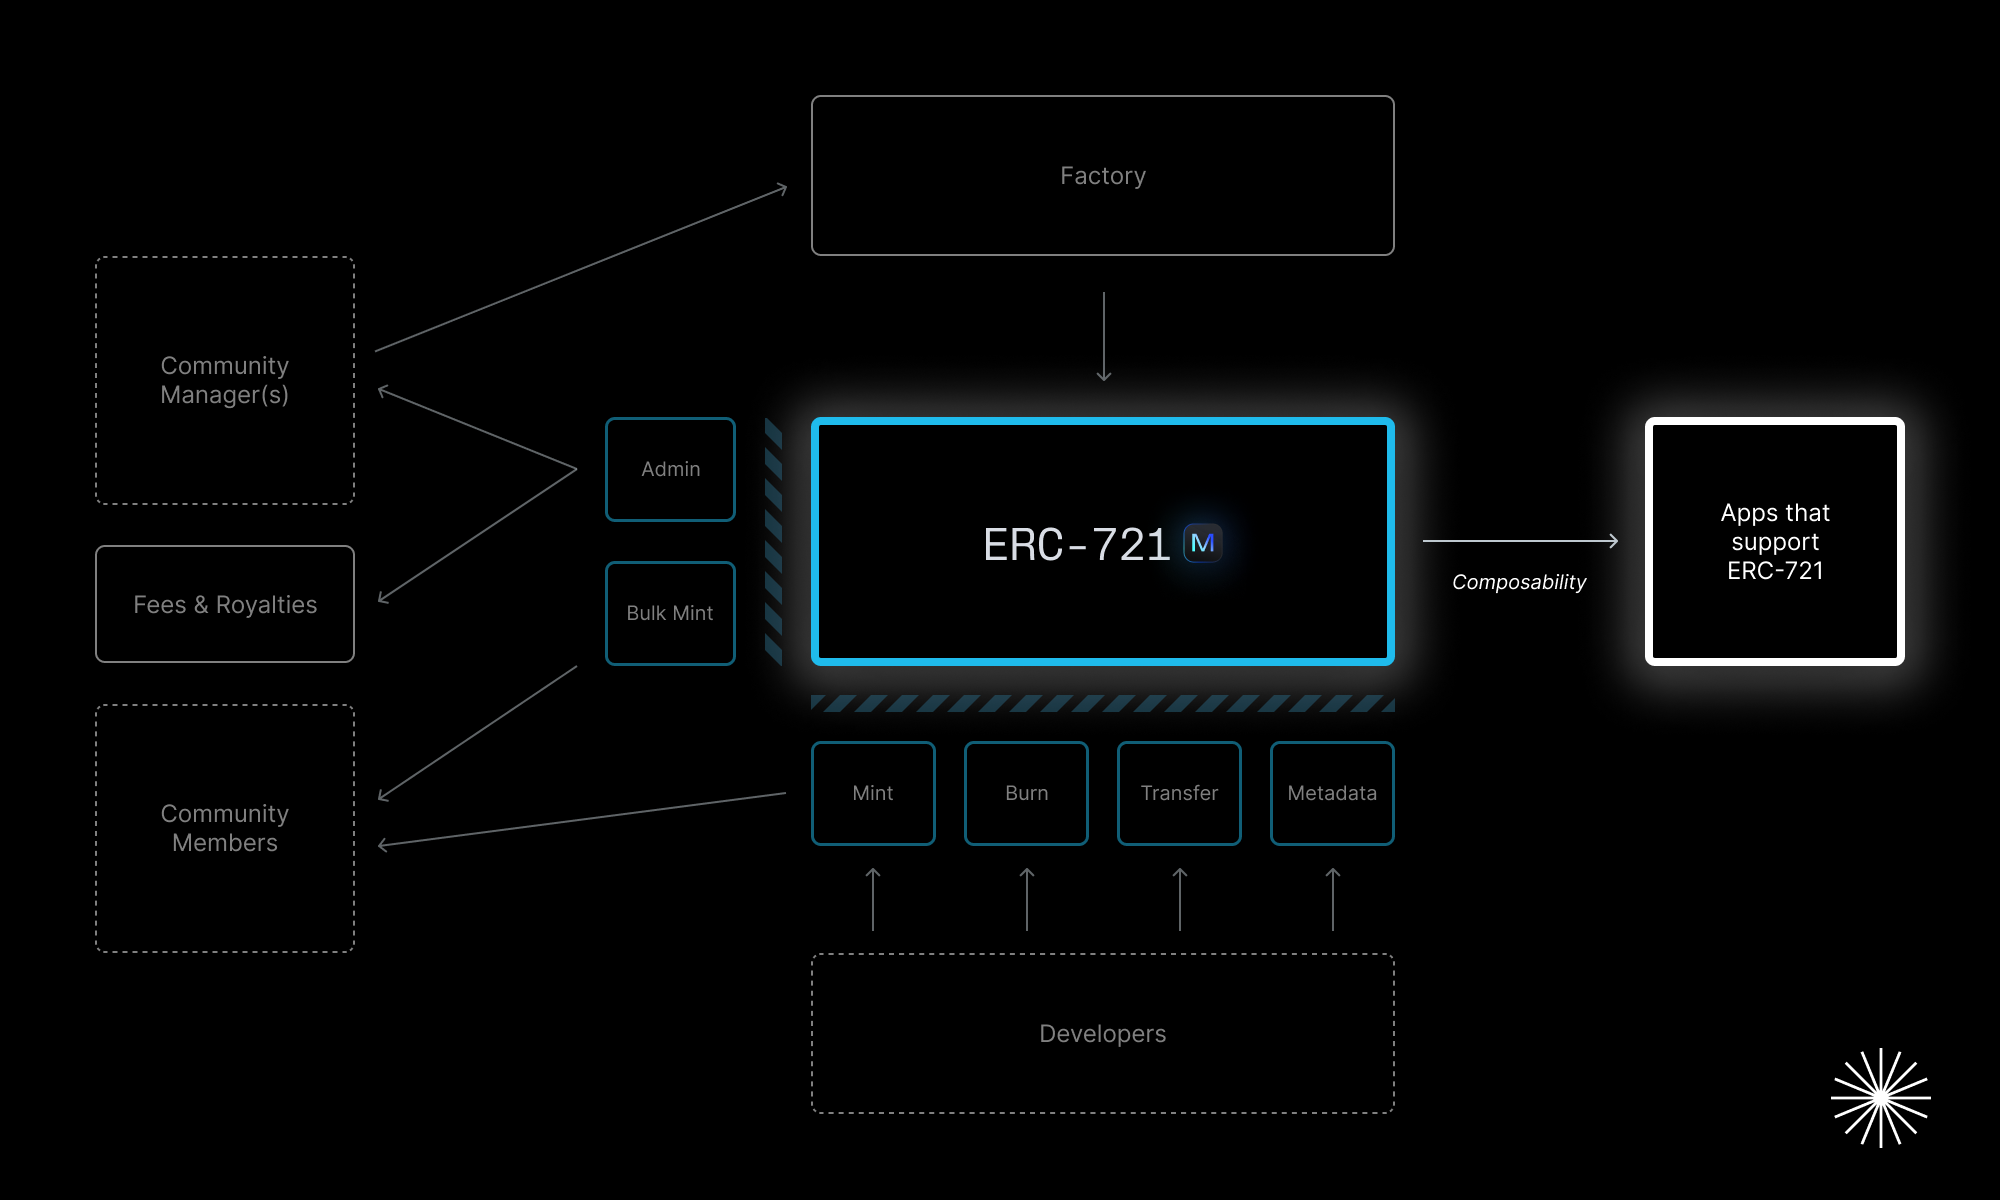 Collectives are composable with all apps that support ERC-721